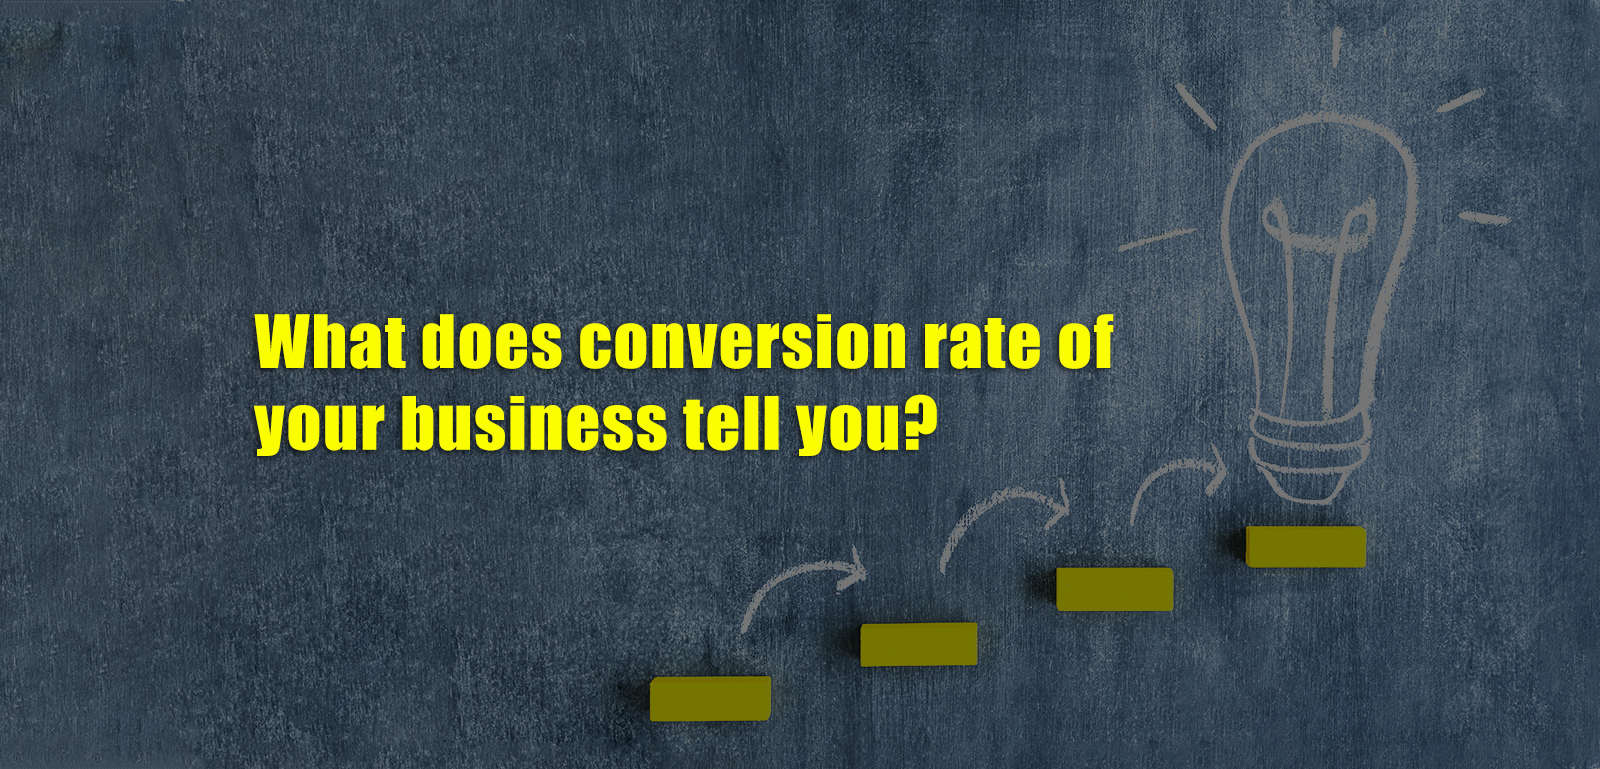 What does conversion rate of your business tell you?